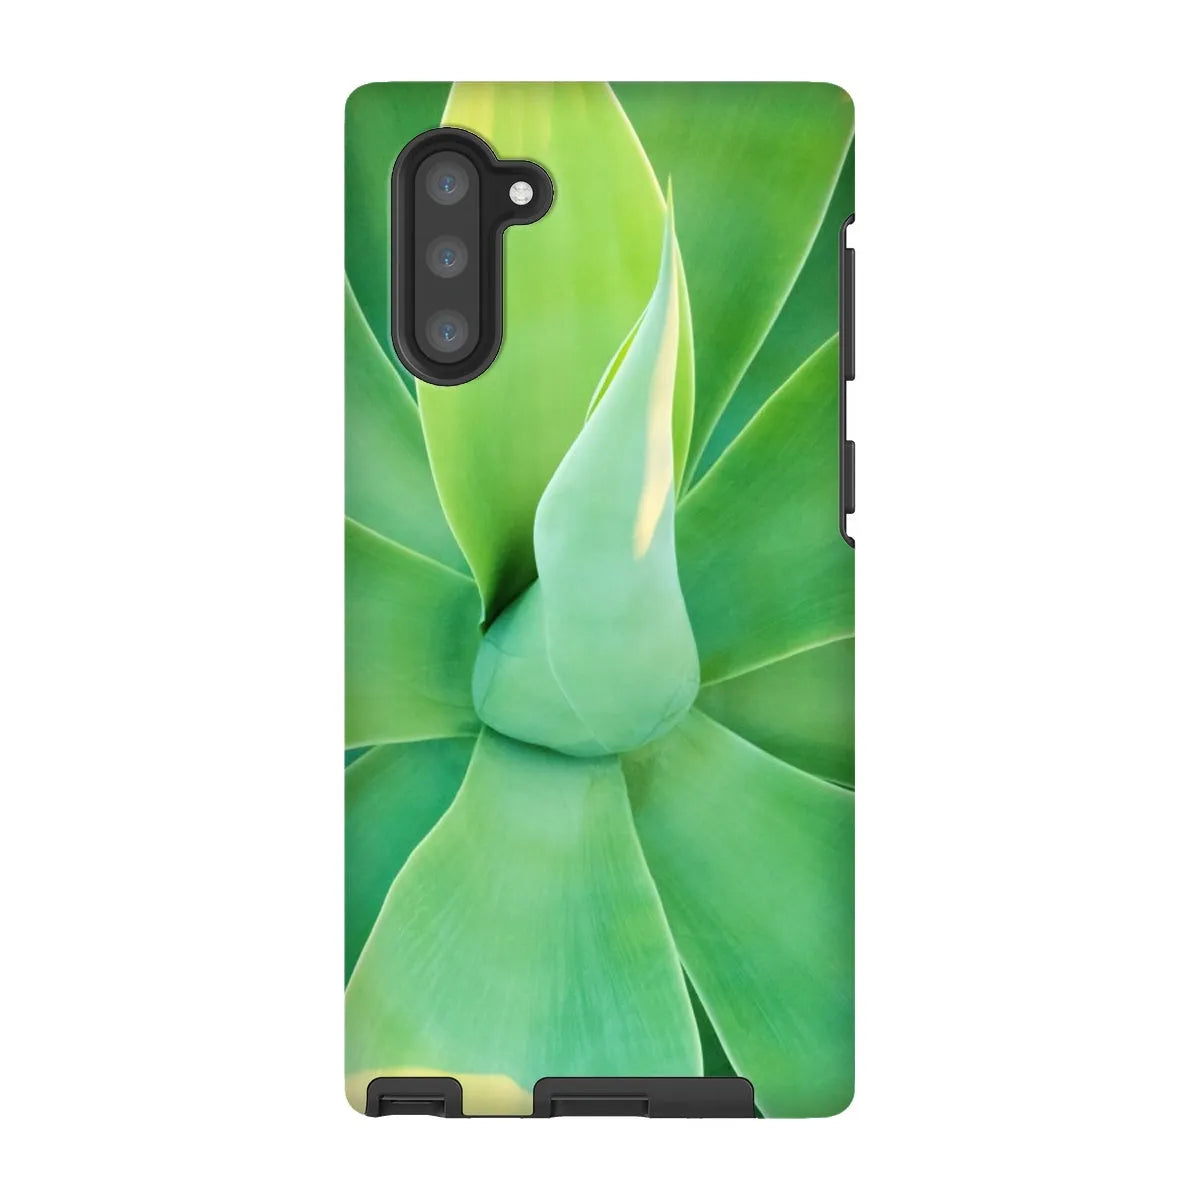 In Bloom Too Tough Phone Case - Samsung Galaxy Note 10 / Matte - Mobile Phone Cases - Aesthetic Art